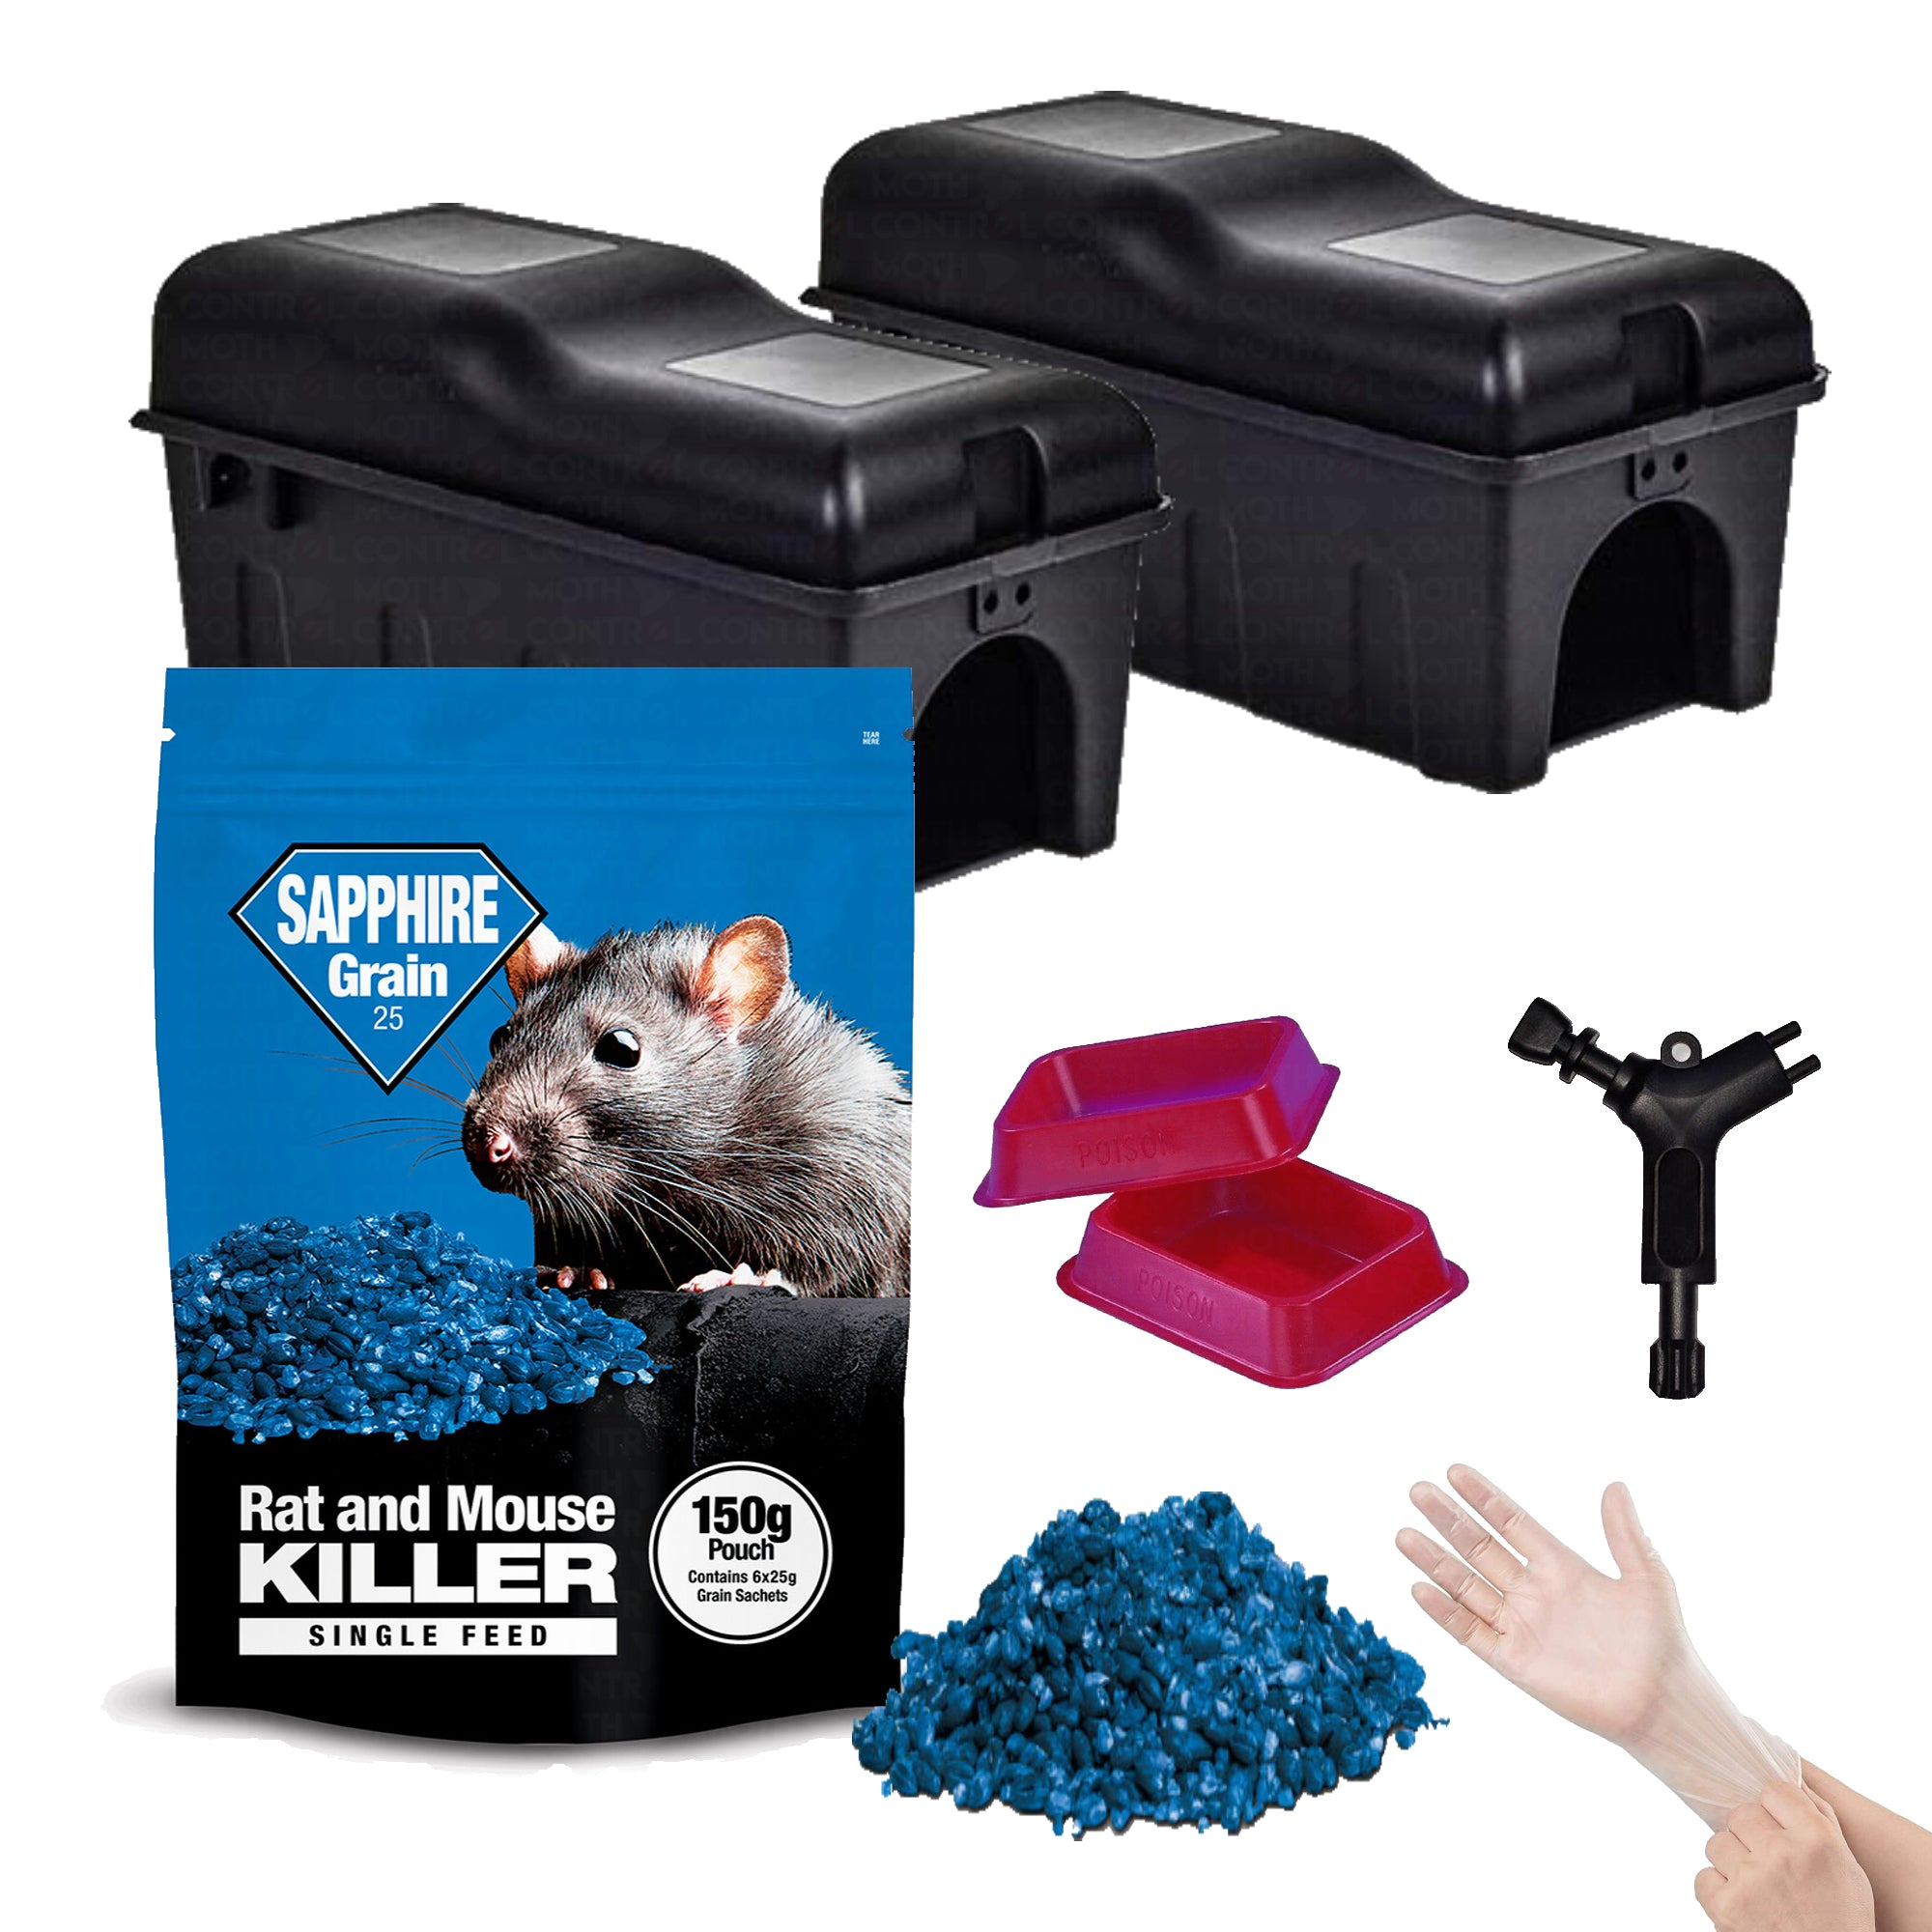 Rat Discreet Bait Station Box & Strong Single Feed Rodent POISON Grain Rats Mouse Mice BRODIFACOUM AT 0.0025% - THE MAXIMUM LEGAL STRENGTH (2 Solo Boxes + 150g Blue Grains) - Moth Control